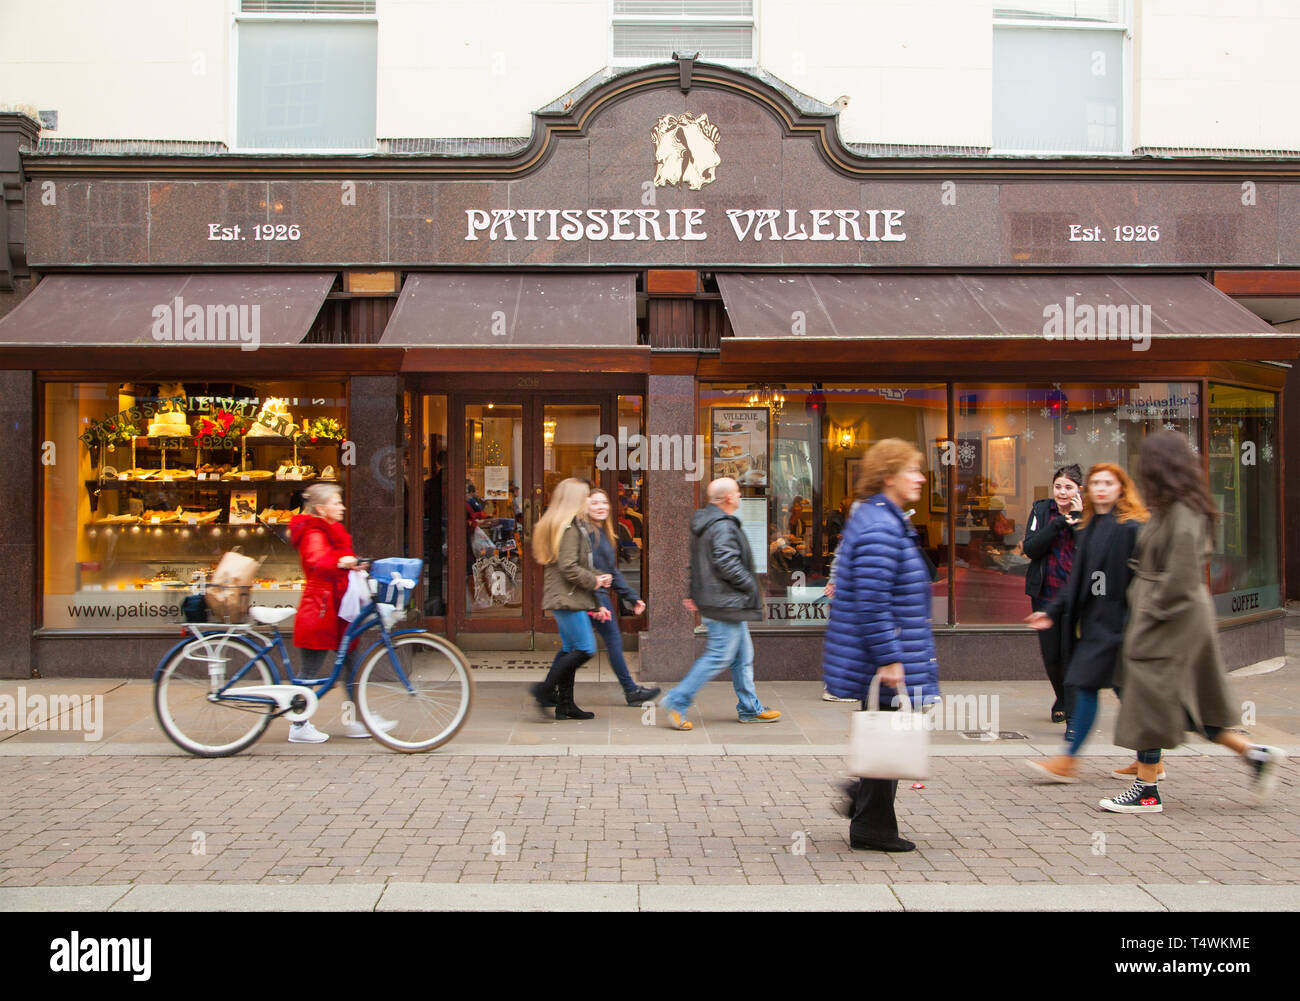 People walking past high street cafe coffee shop confectioner Patisserie Valerie Stock Photo